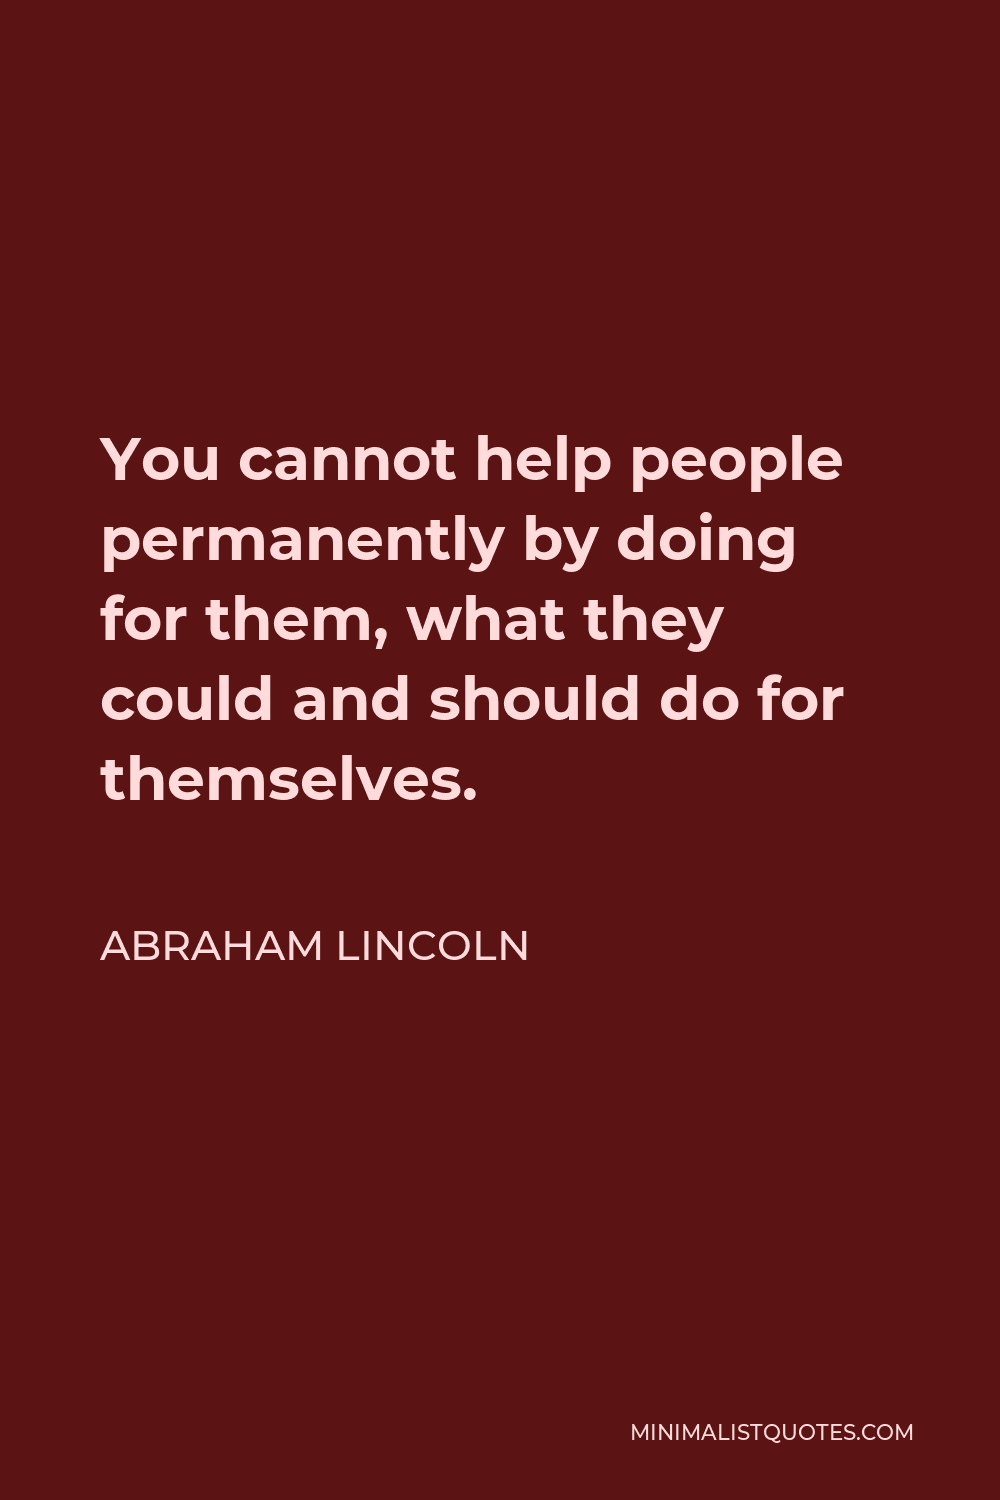 Abraham Lincoln Quote: You cannot help people permanently by doing for ...